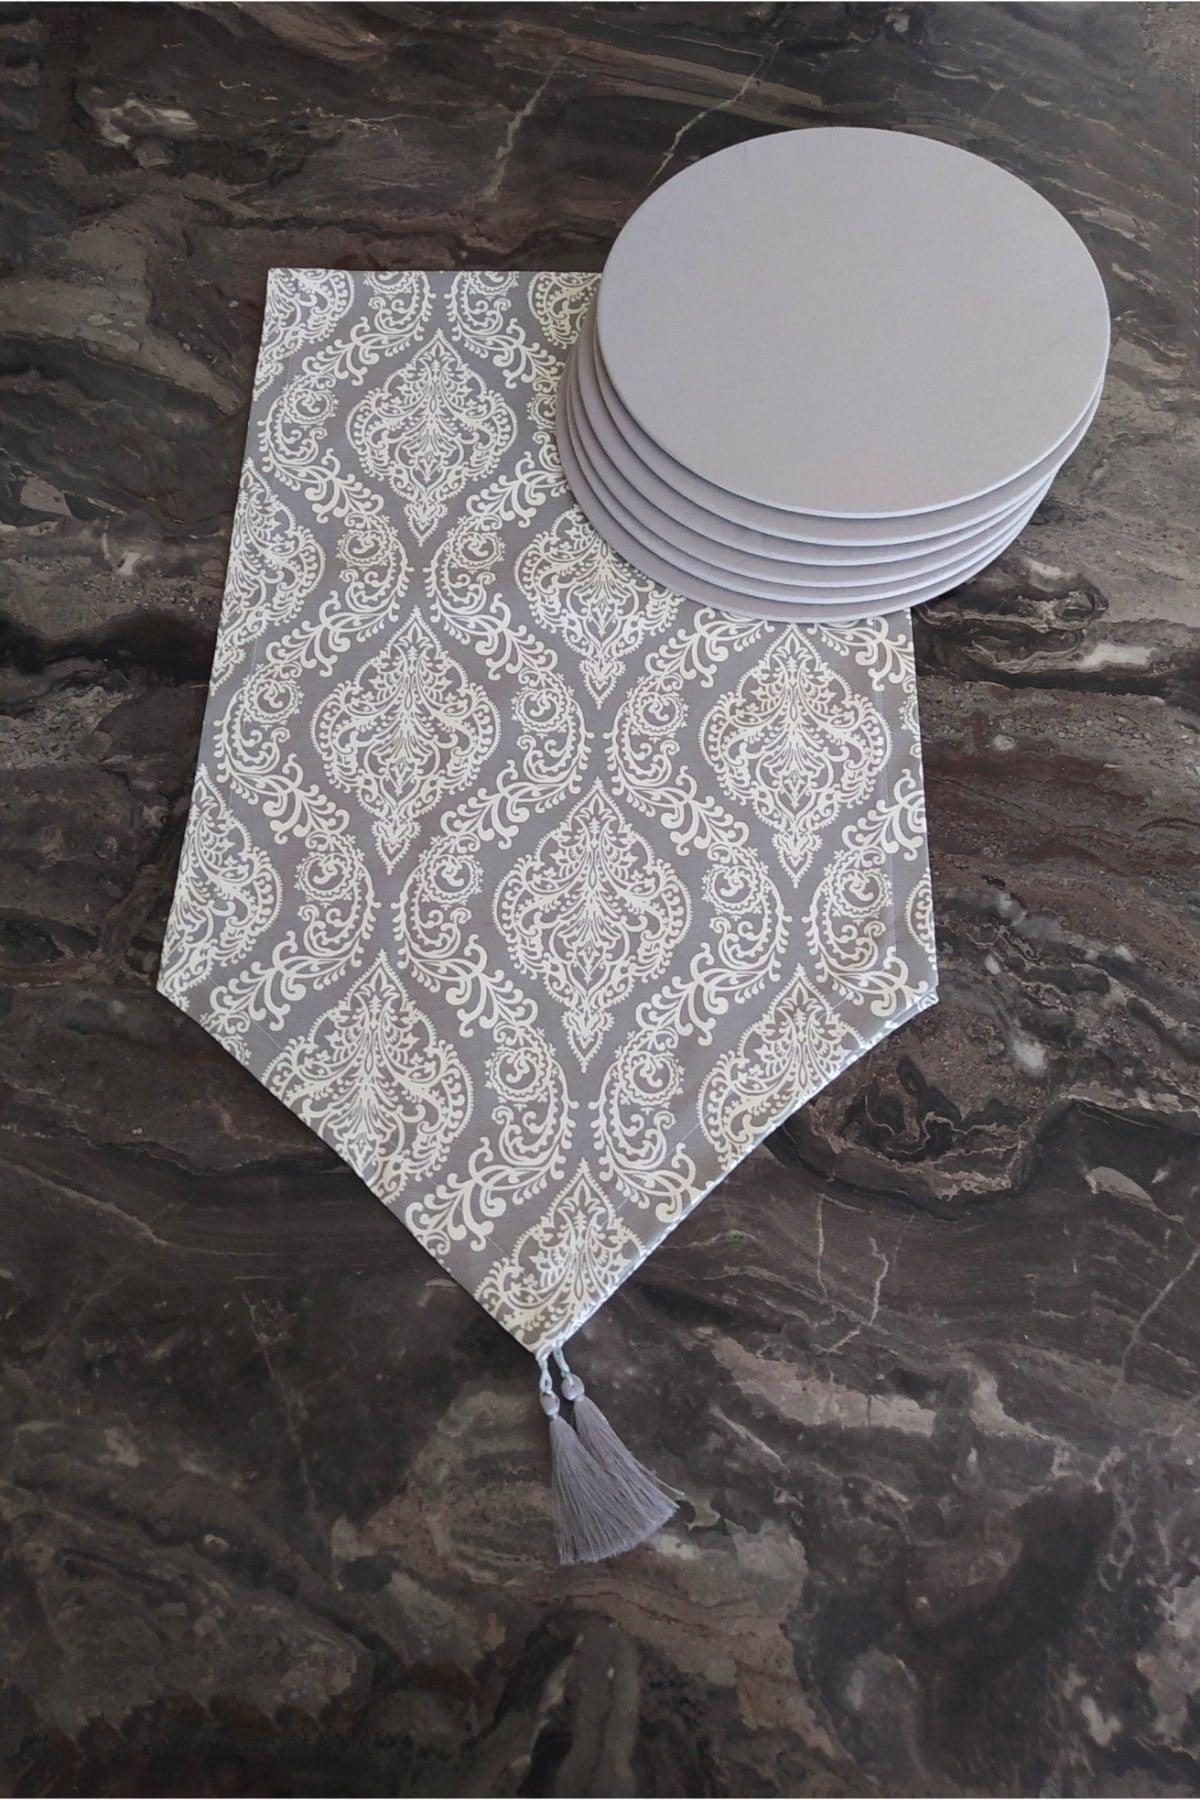 Patterned Runner 6 Pieces Gray Placemat Cover Set - Swordslife